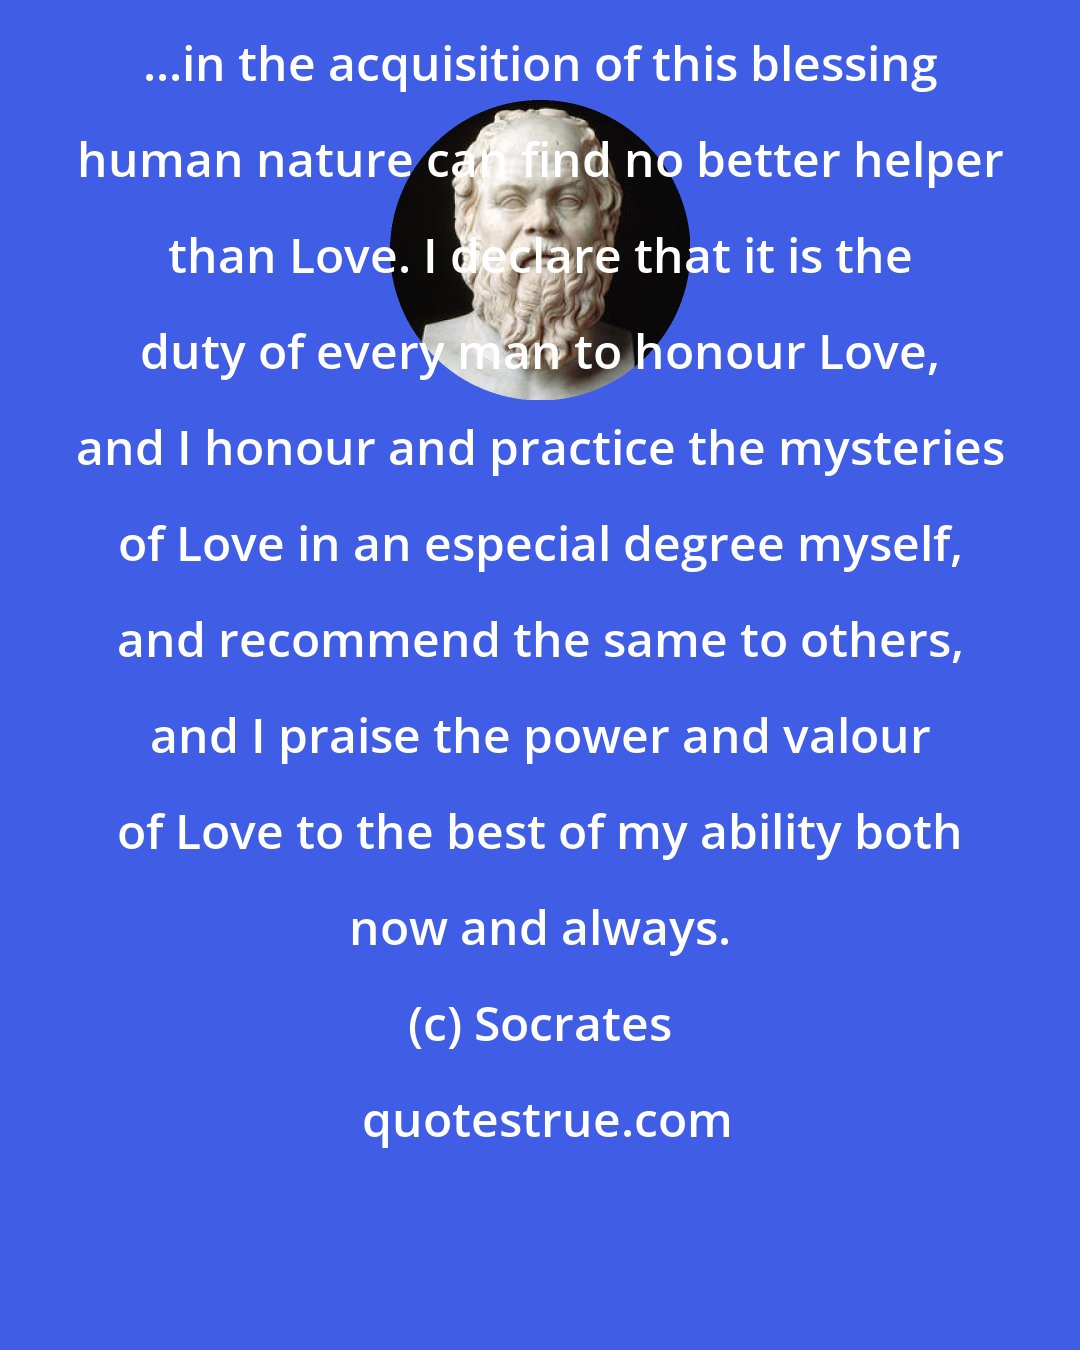 Socrates: ...in the acquisition of this blessing human nature can find no better helper than Love. I declare that it is the duty of every man to honour Love, and I honour and practice the mysteries of Love in an especial degree myself, and recommend the same to others, and I praise the power and valour of Love to the best of my ability both now and always.